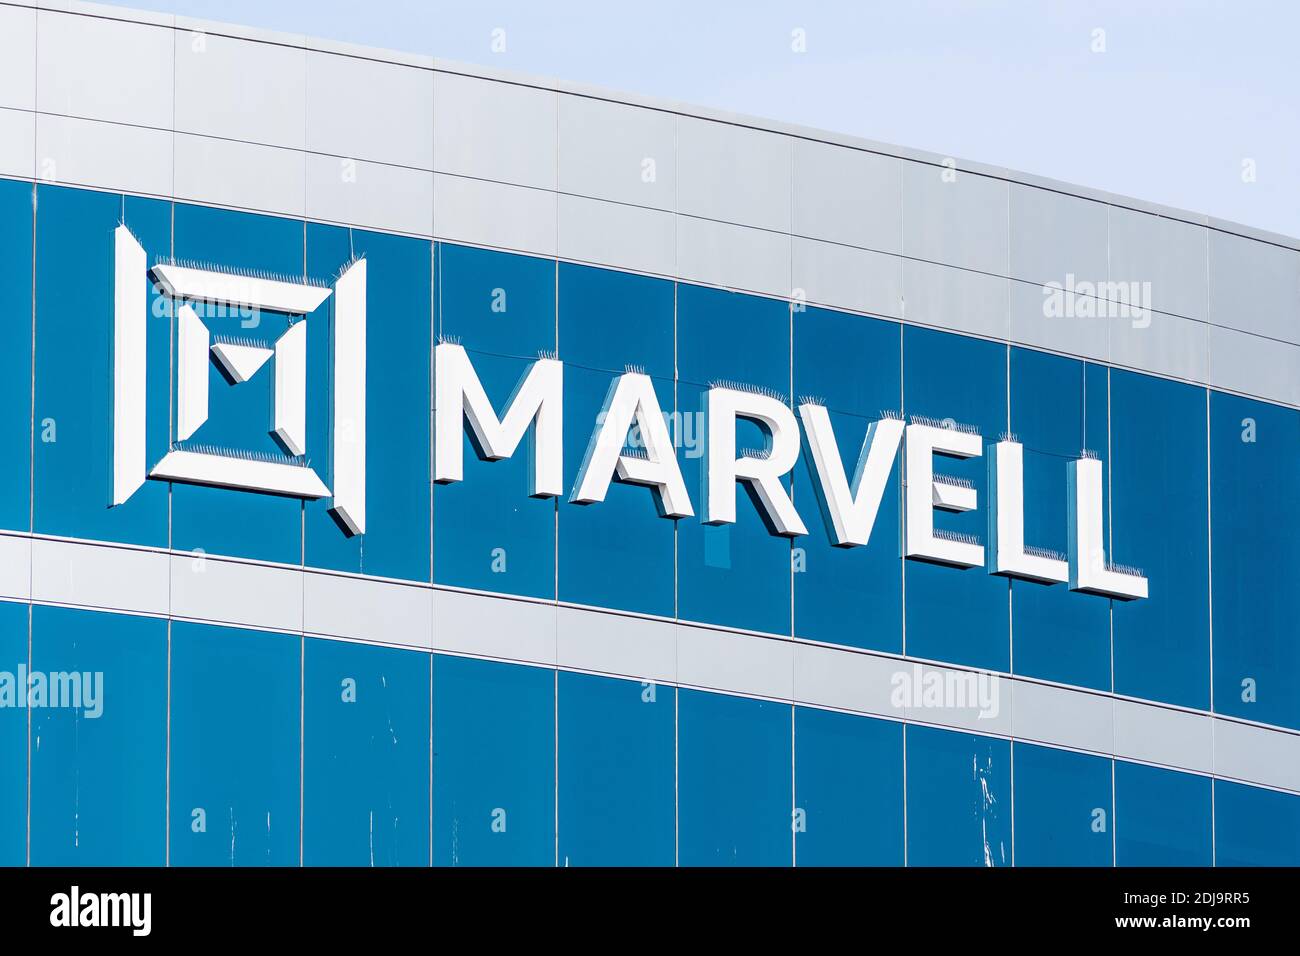 Oct 8, 2020 Santa Clara / CA / USA - Marvell logo at their operating headquarters in Silicon Valley; Marvell Technology Group is a semiconductor compa Stock Photo